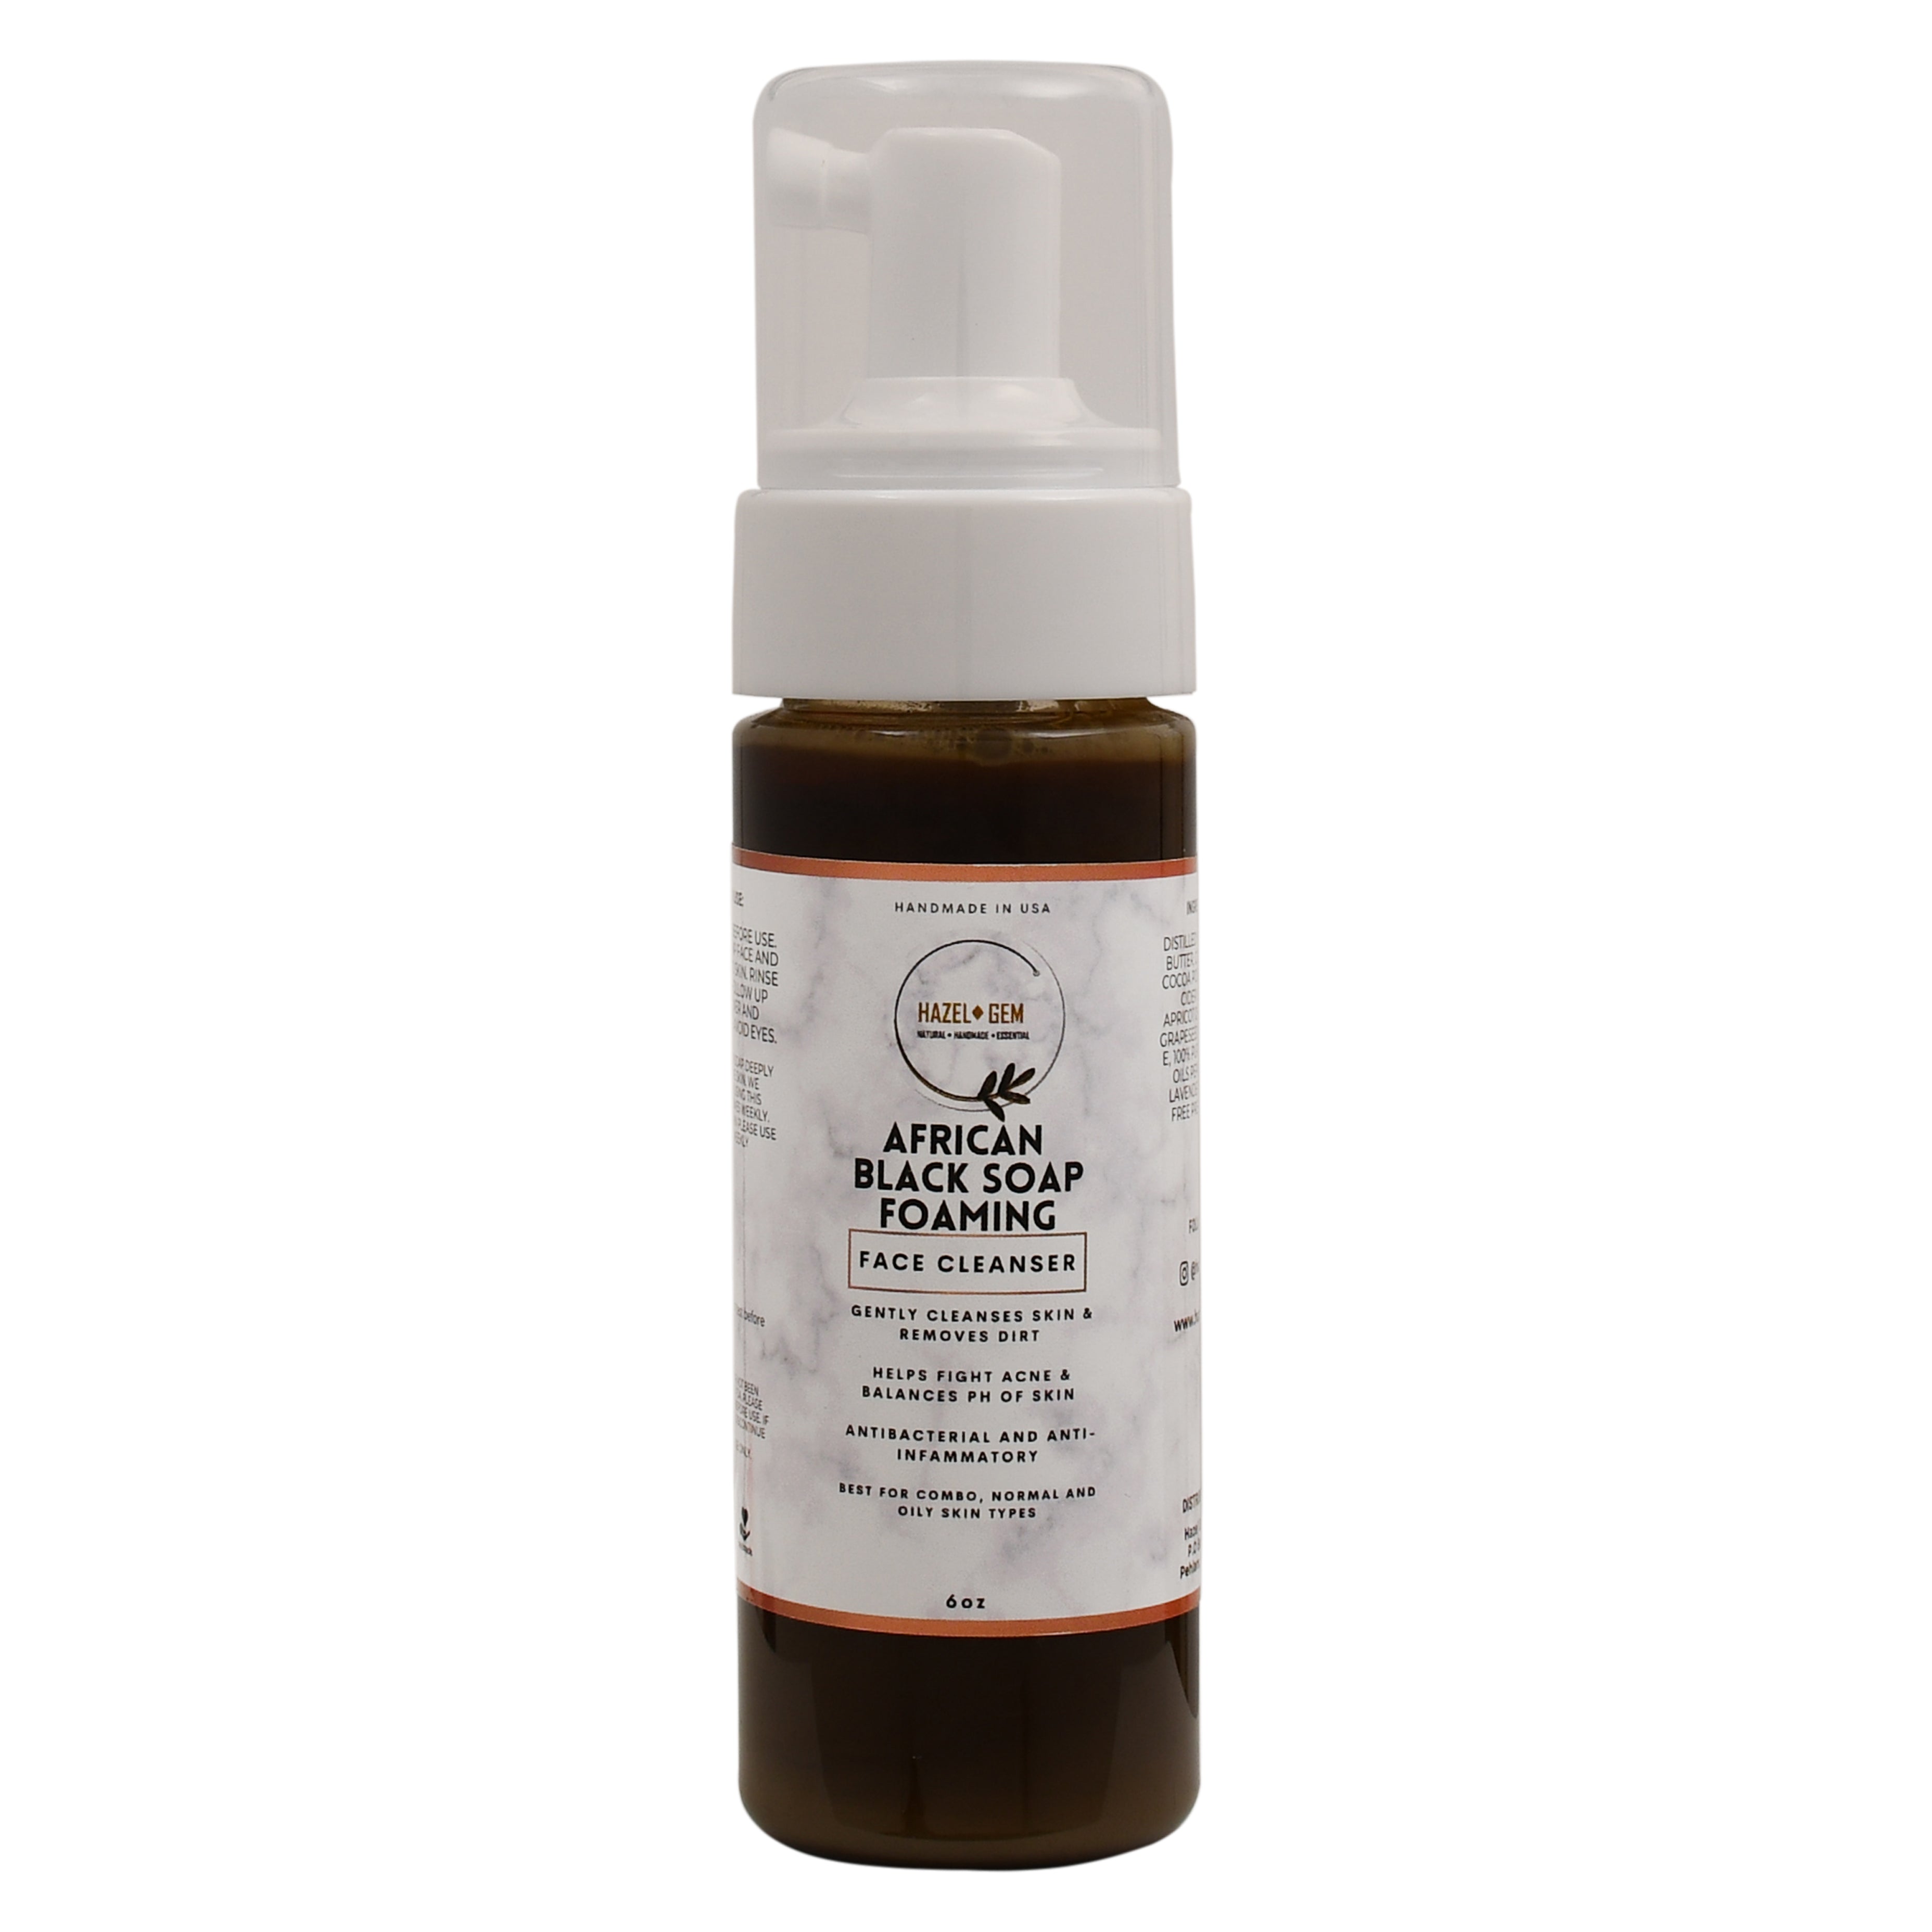 African Black Soap Foaming Face Cleanser